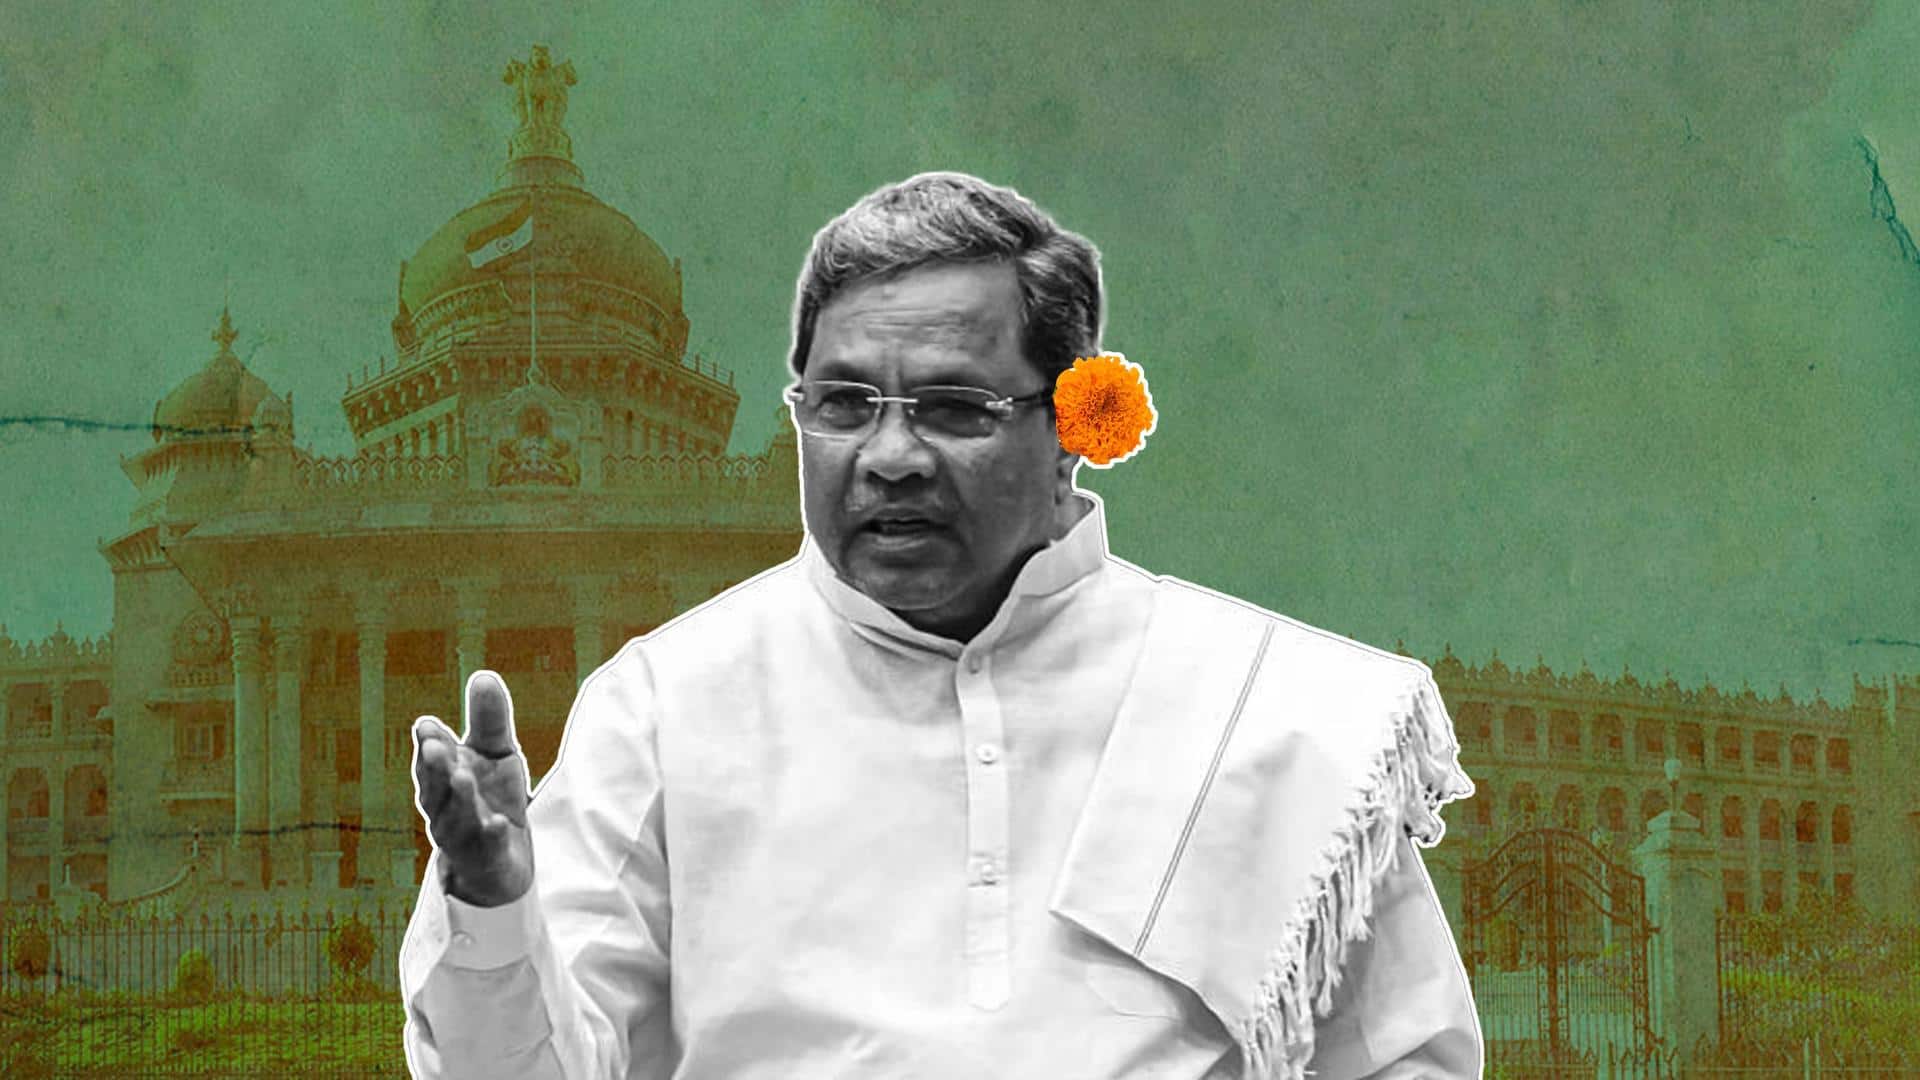 In Karnataka assembly, Opposition protest with flowers and fire speeches